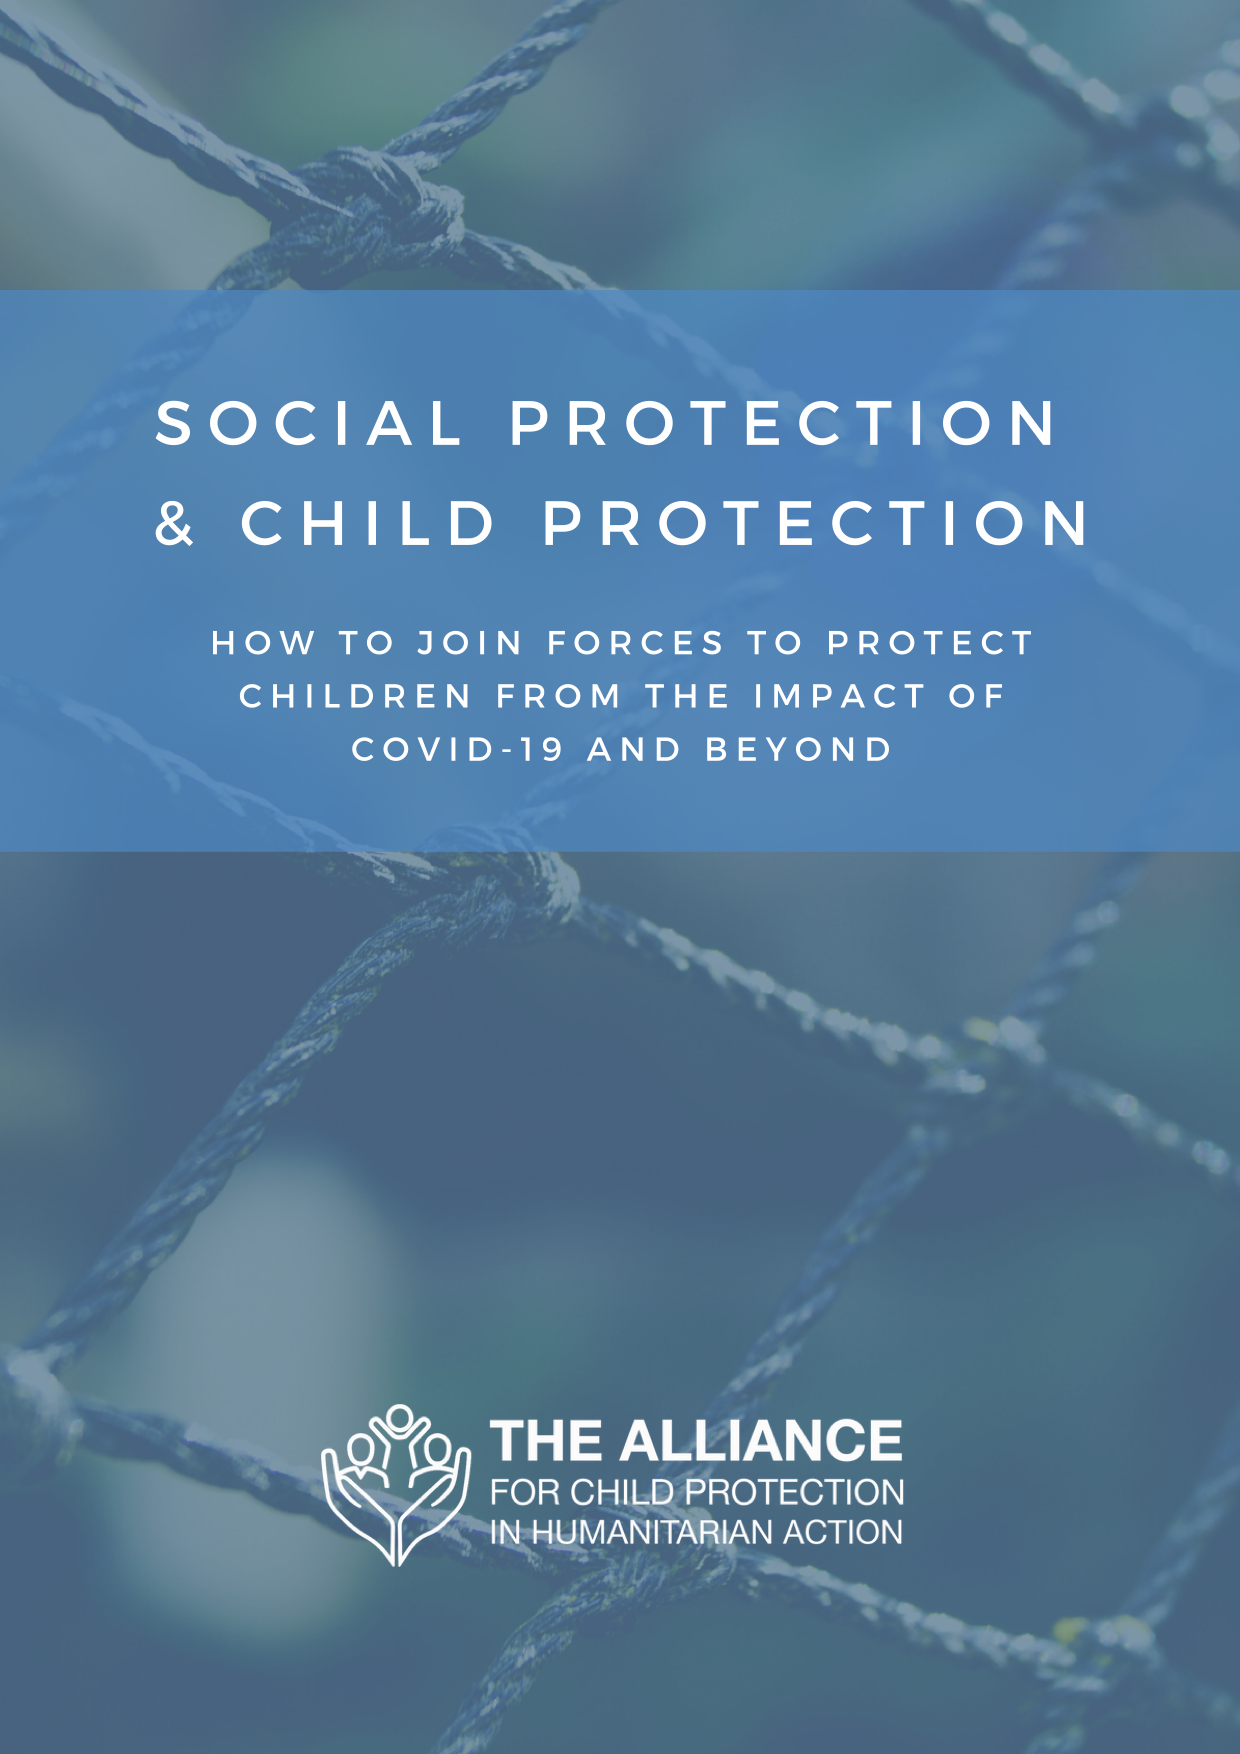 The Impact of Social Protection on Children: A review of the